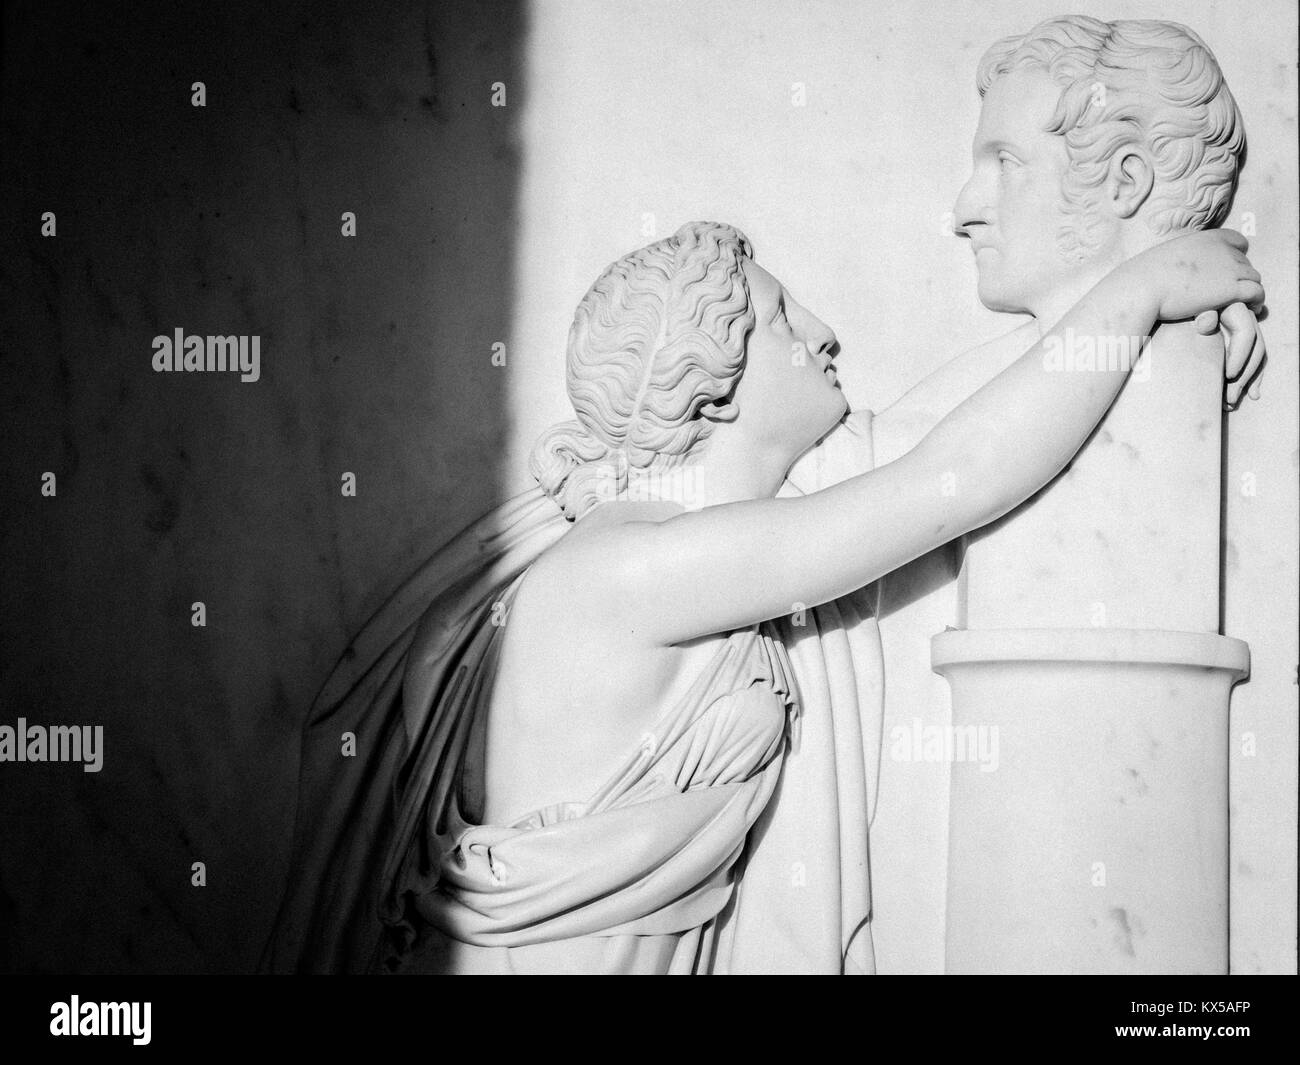 Bas relief of an ancient woman (roman or greek) hugs a man's bust. Really intense image Stock Photo